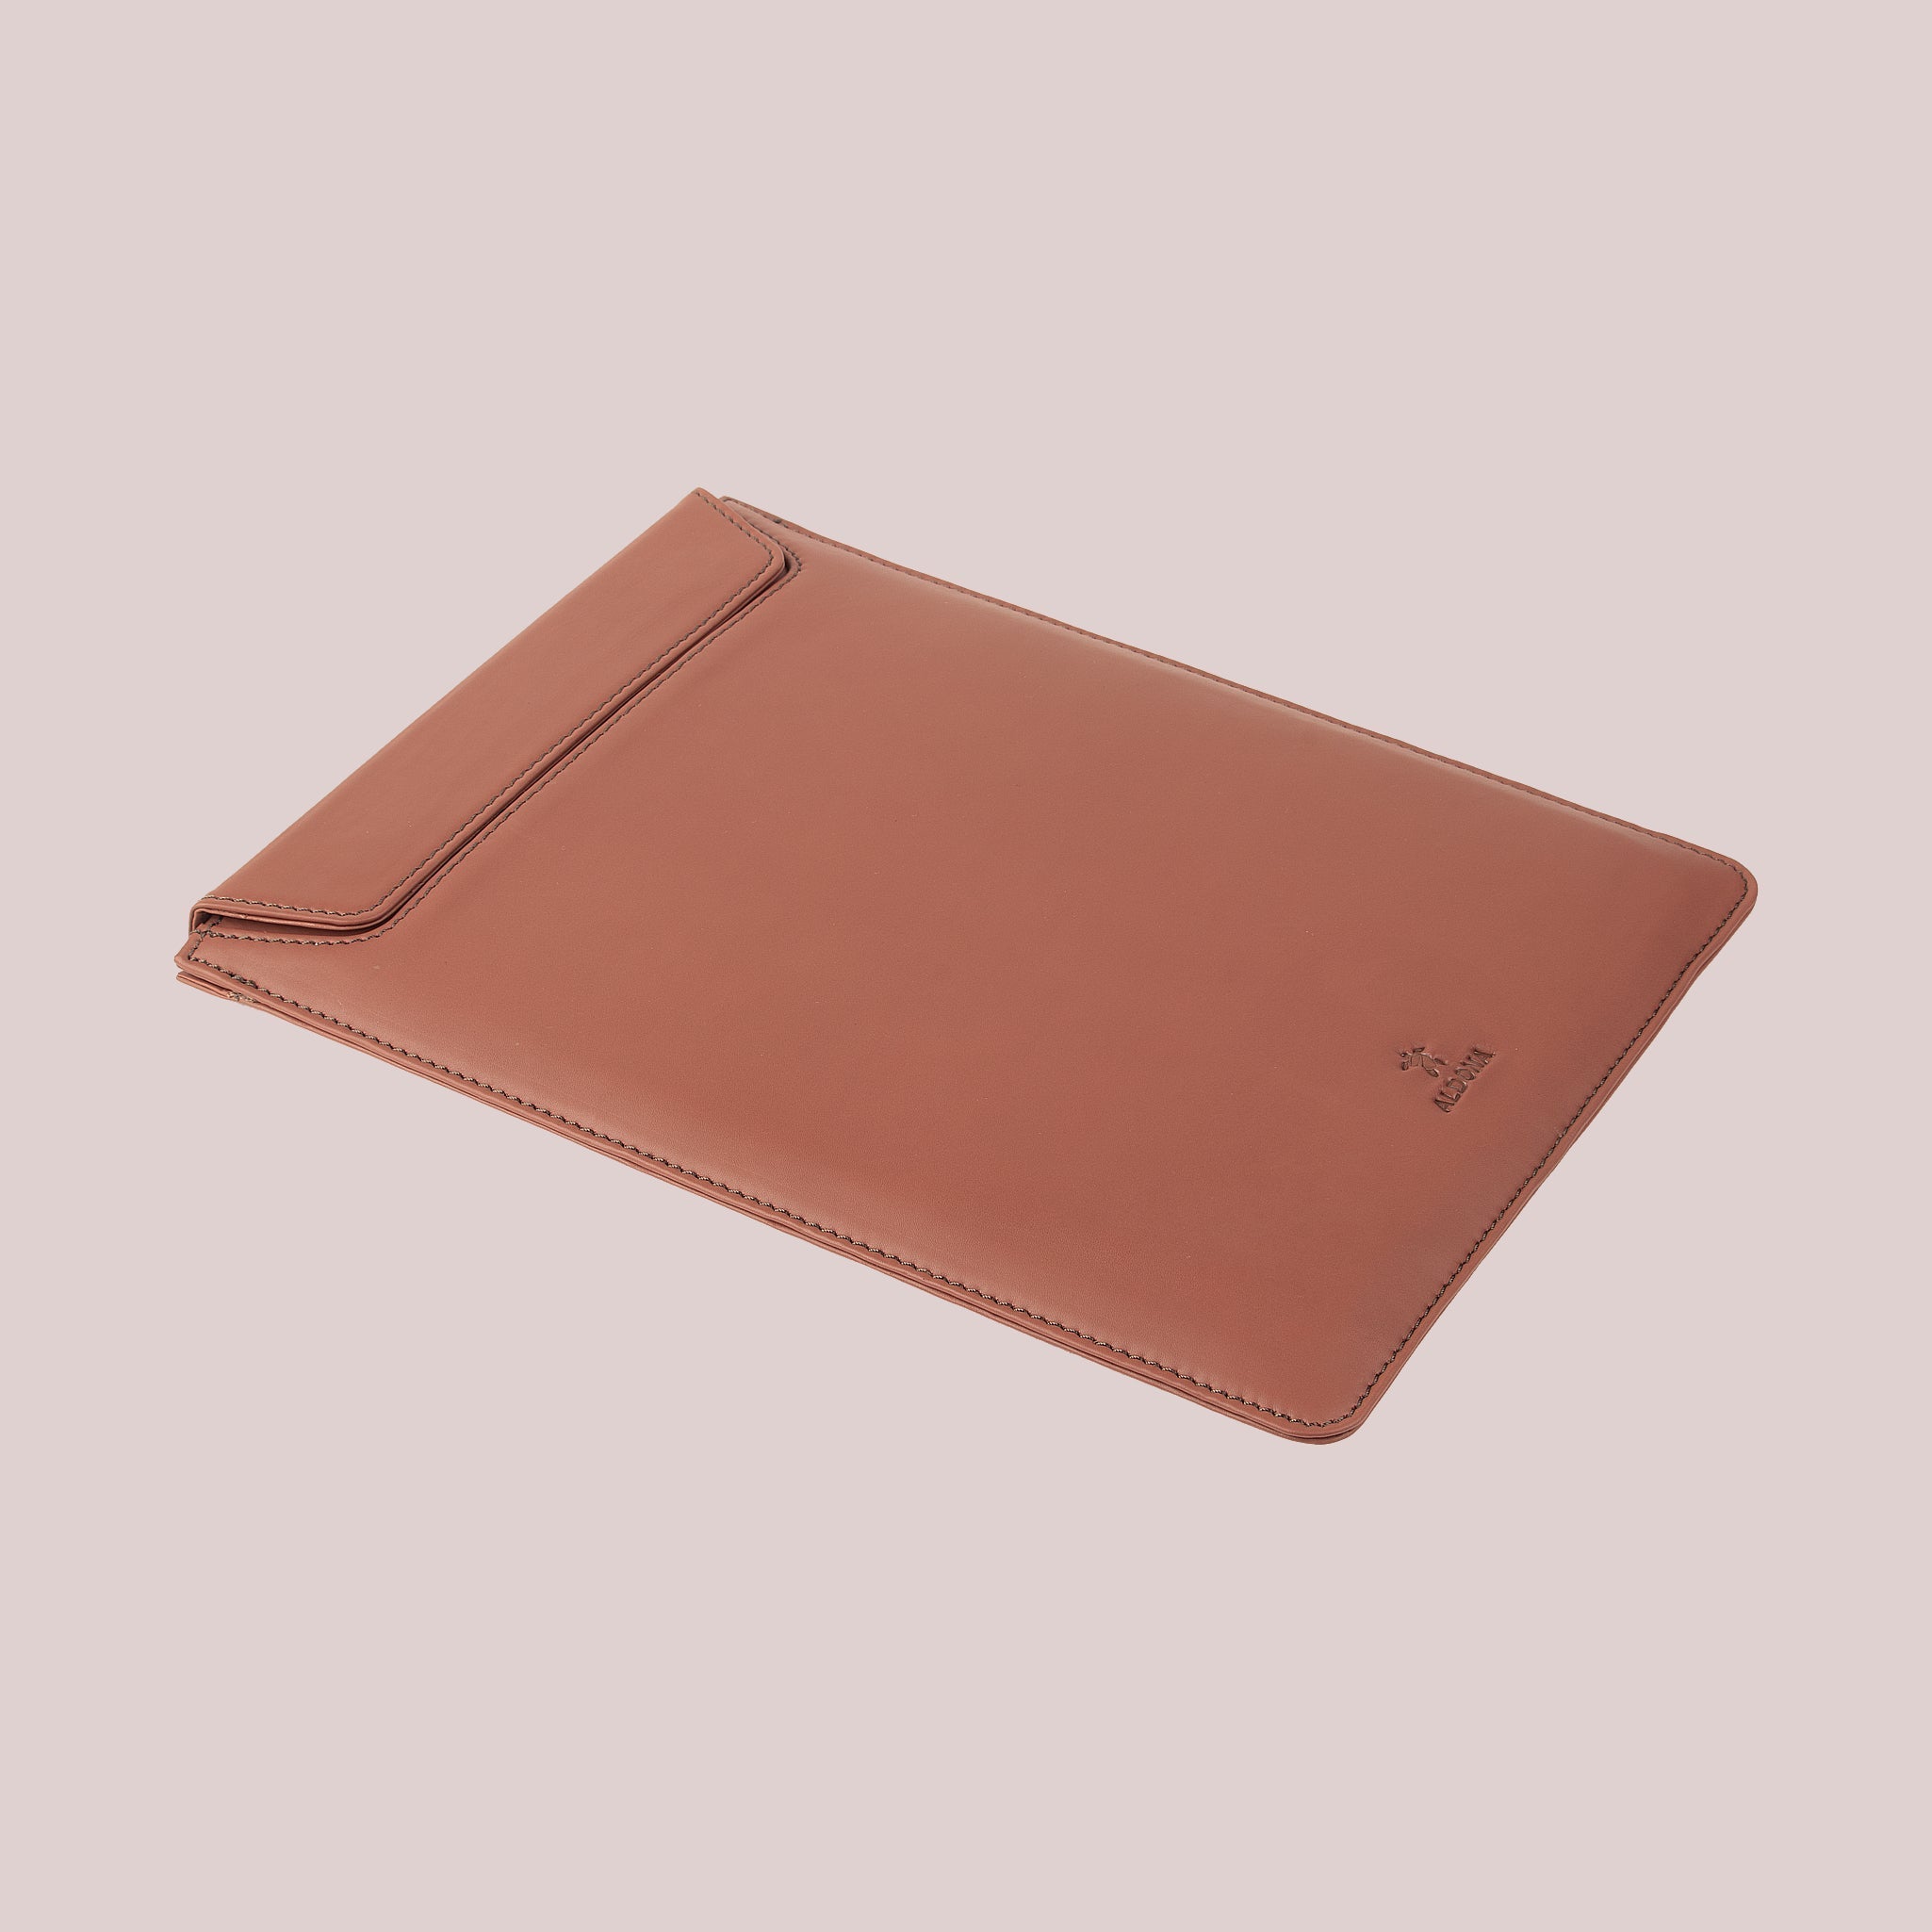 Buy online tan leather sleeve for Macbook laptops, with a flap